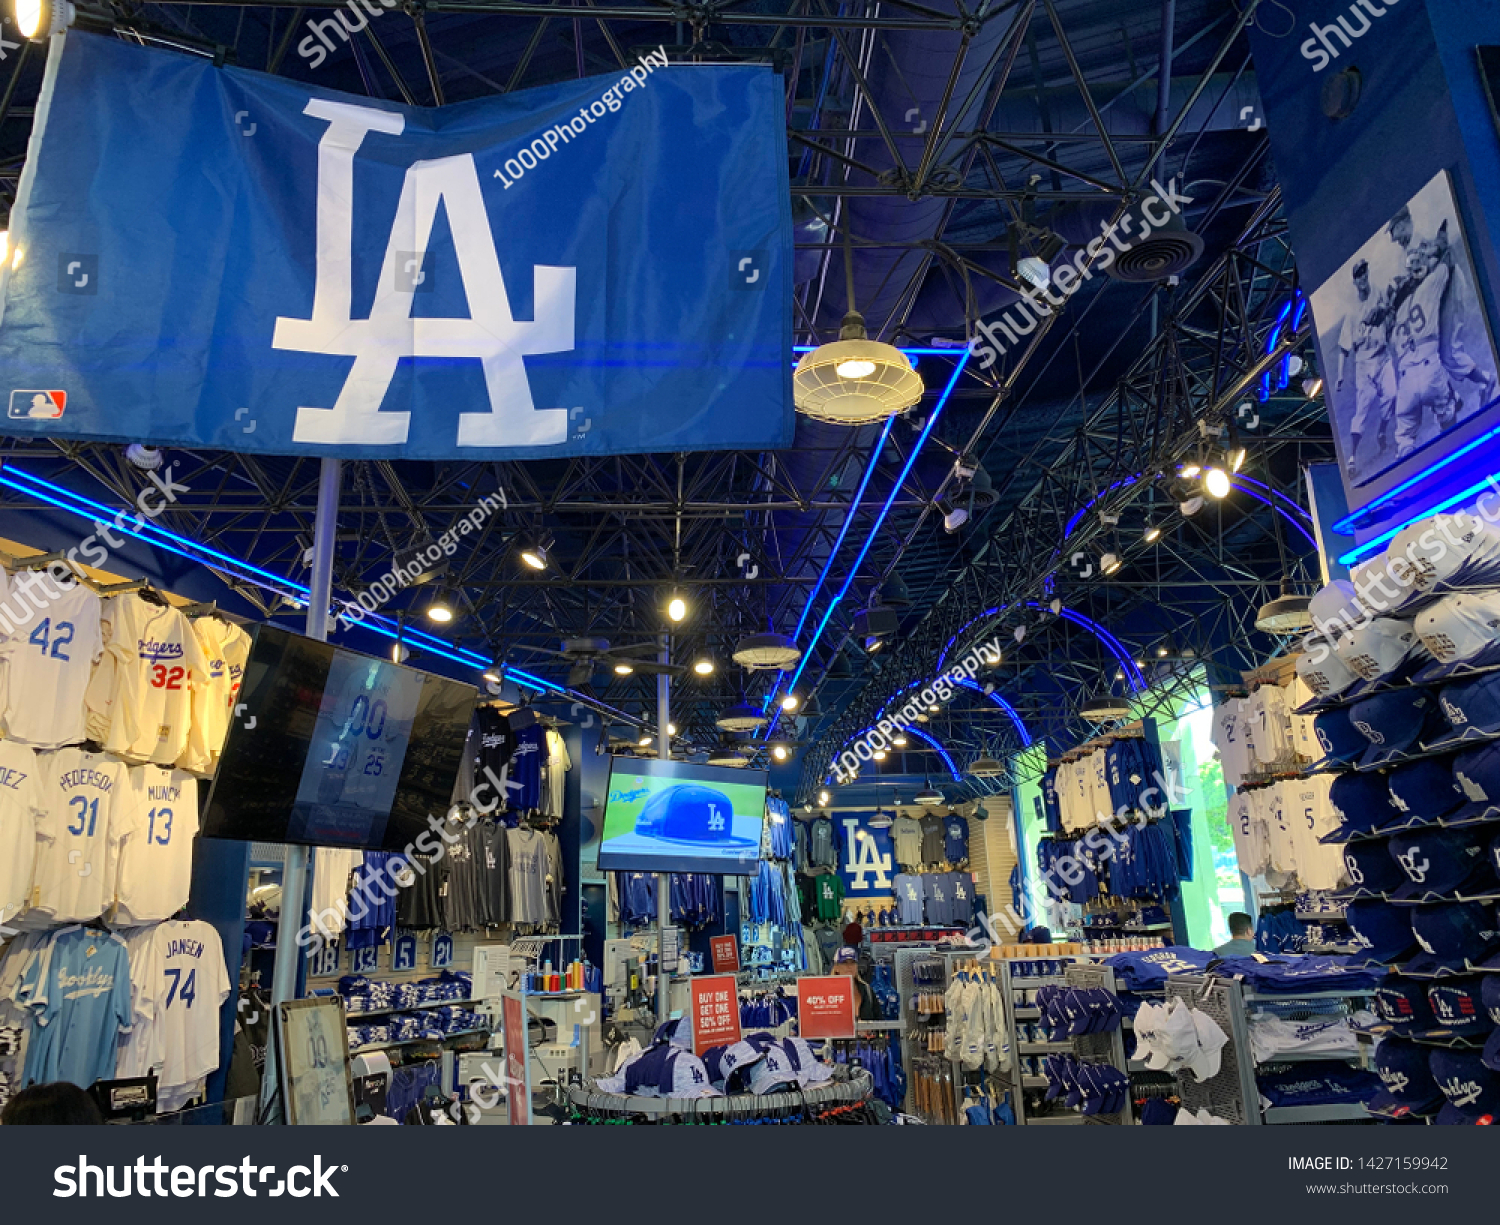 the dodgers store